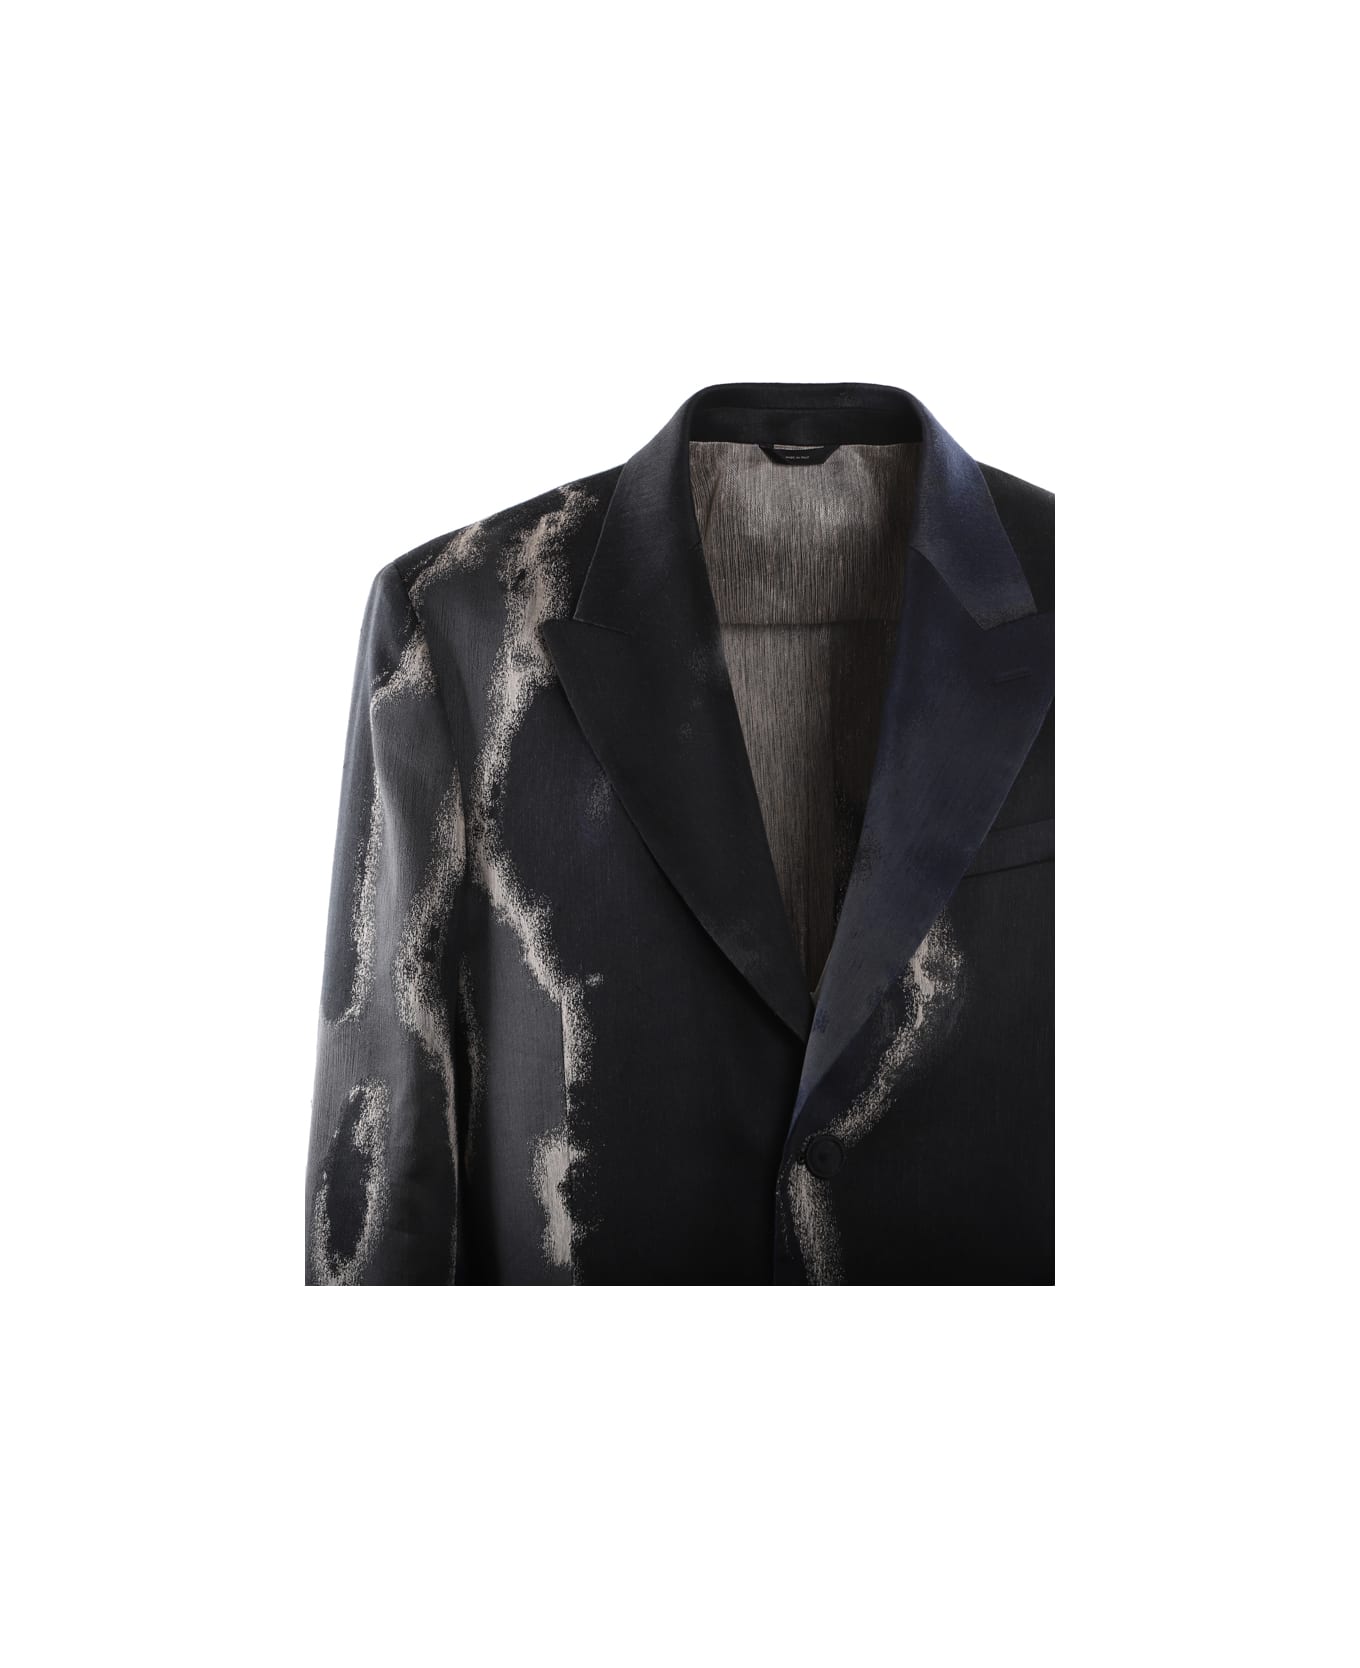 Fendi Linen And Cotton Jacket With Earth Motif - BLACK